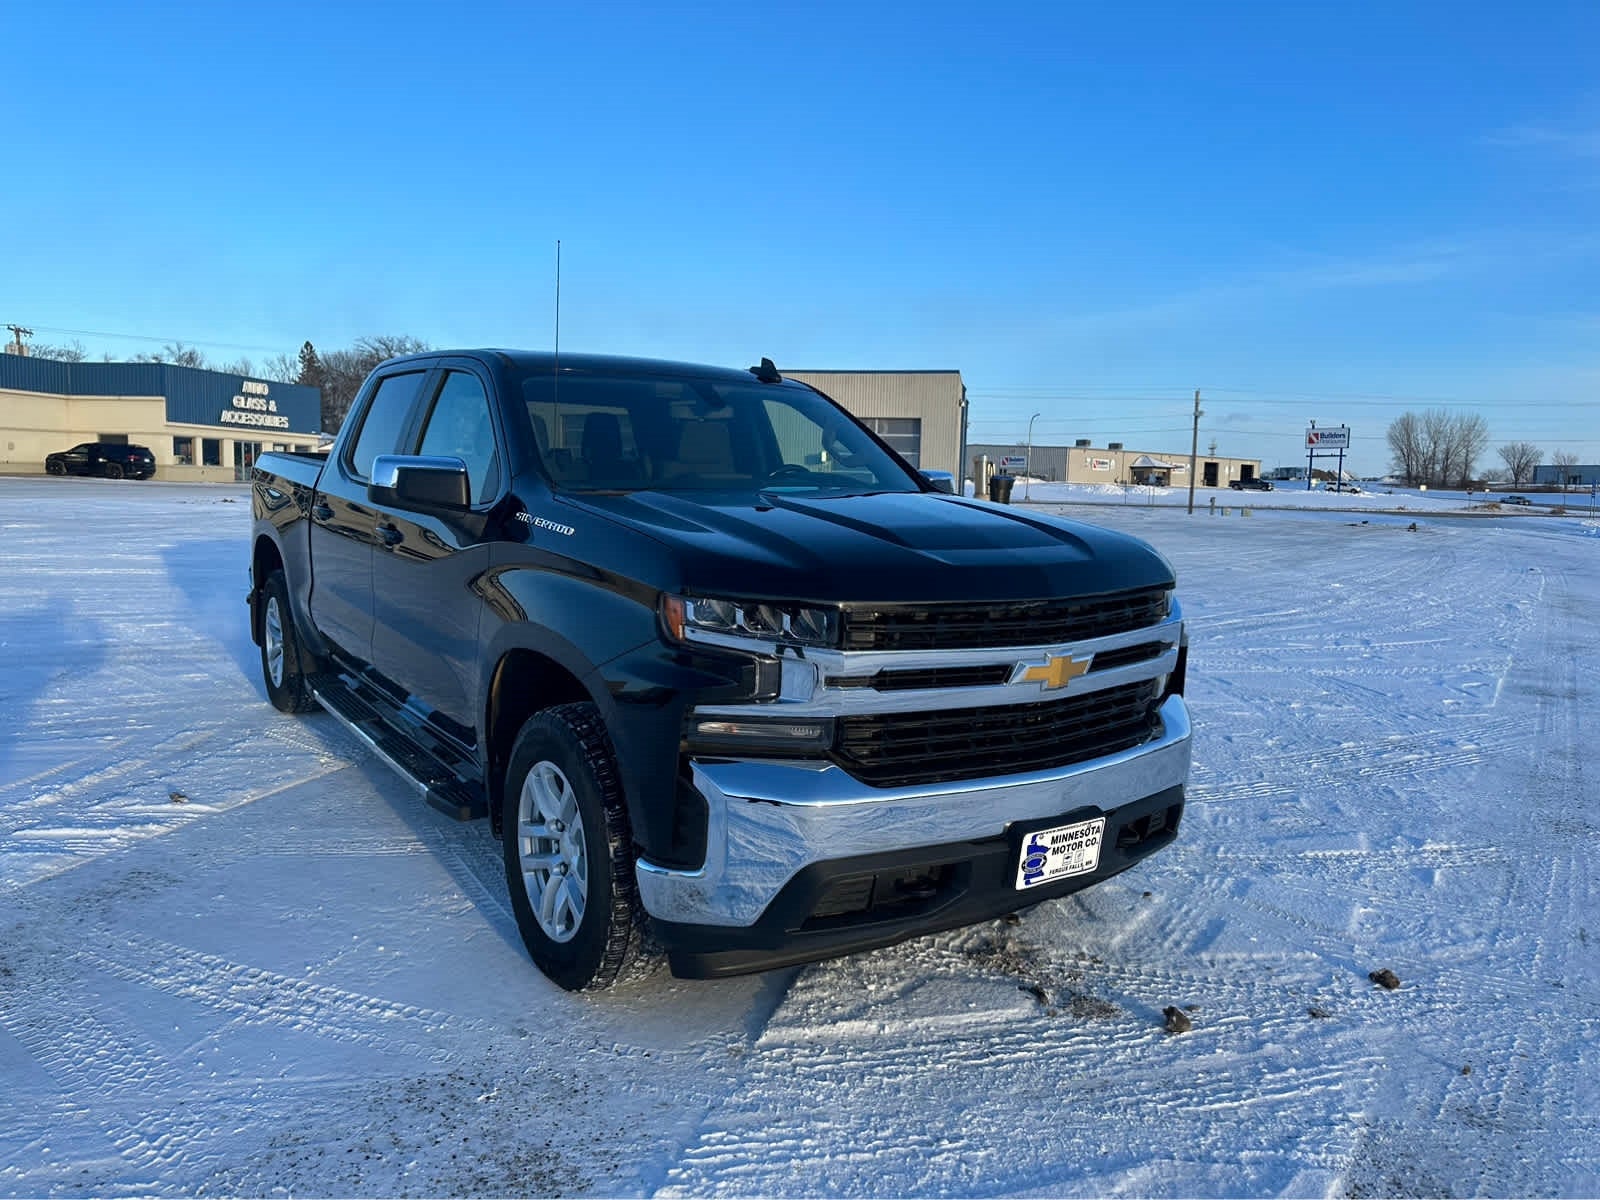 Used 2020 Chevrolet Silverado 1500 LT with VIN 3GCUYDED5LG400861 for sale in Fergus Falls, Minnesota